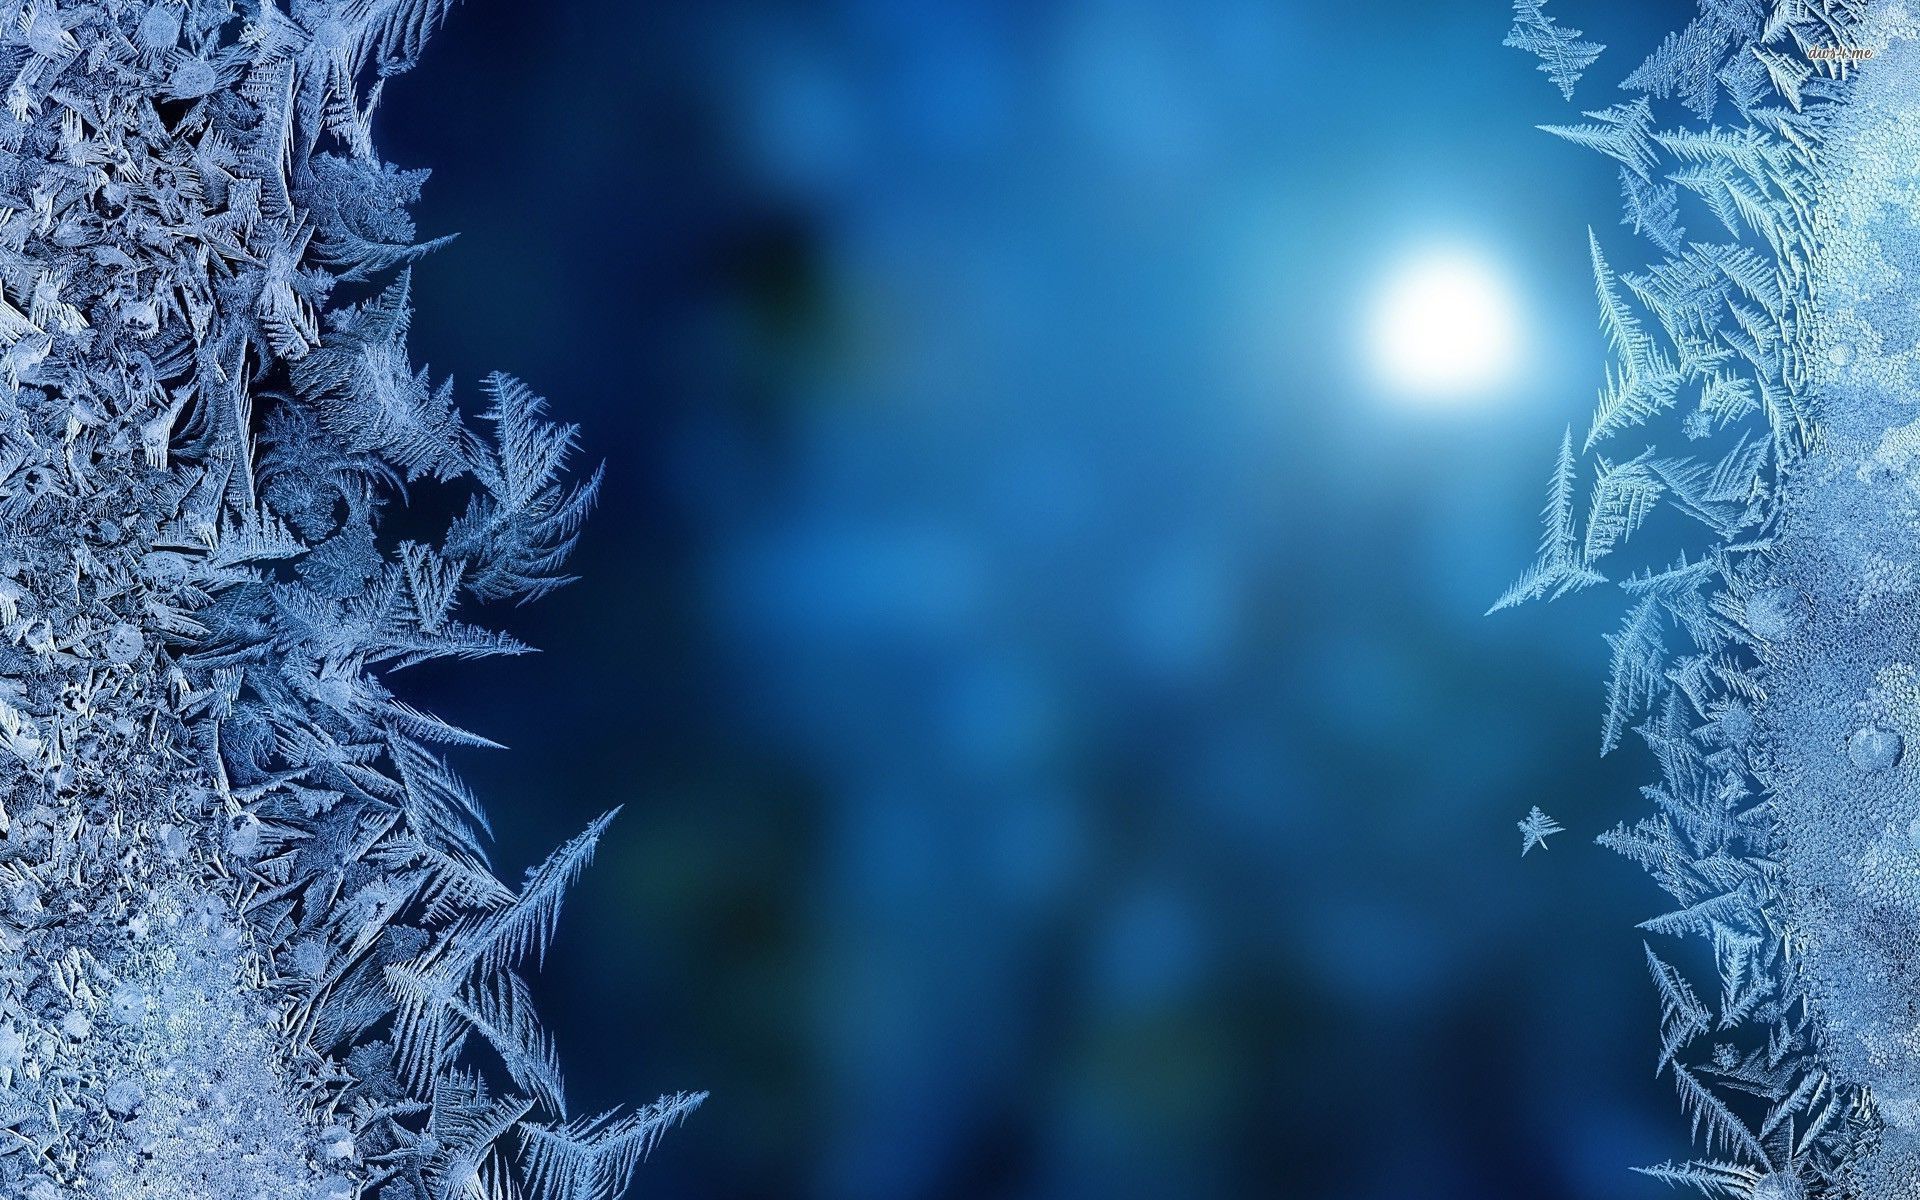 Ice Crystals Wallpaper Free Ice Crystals Background